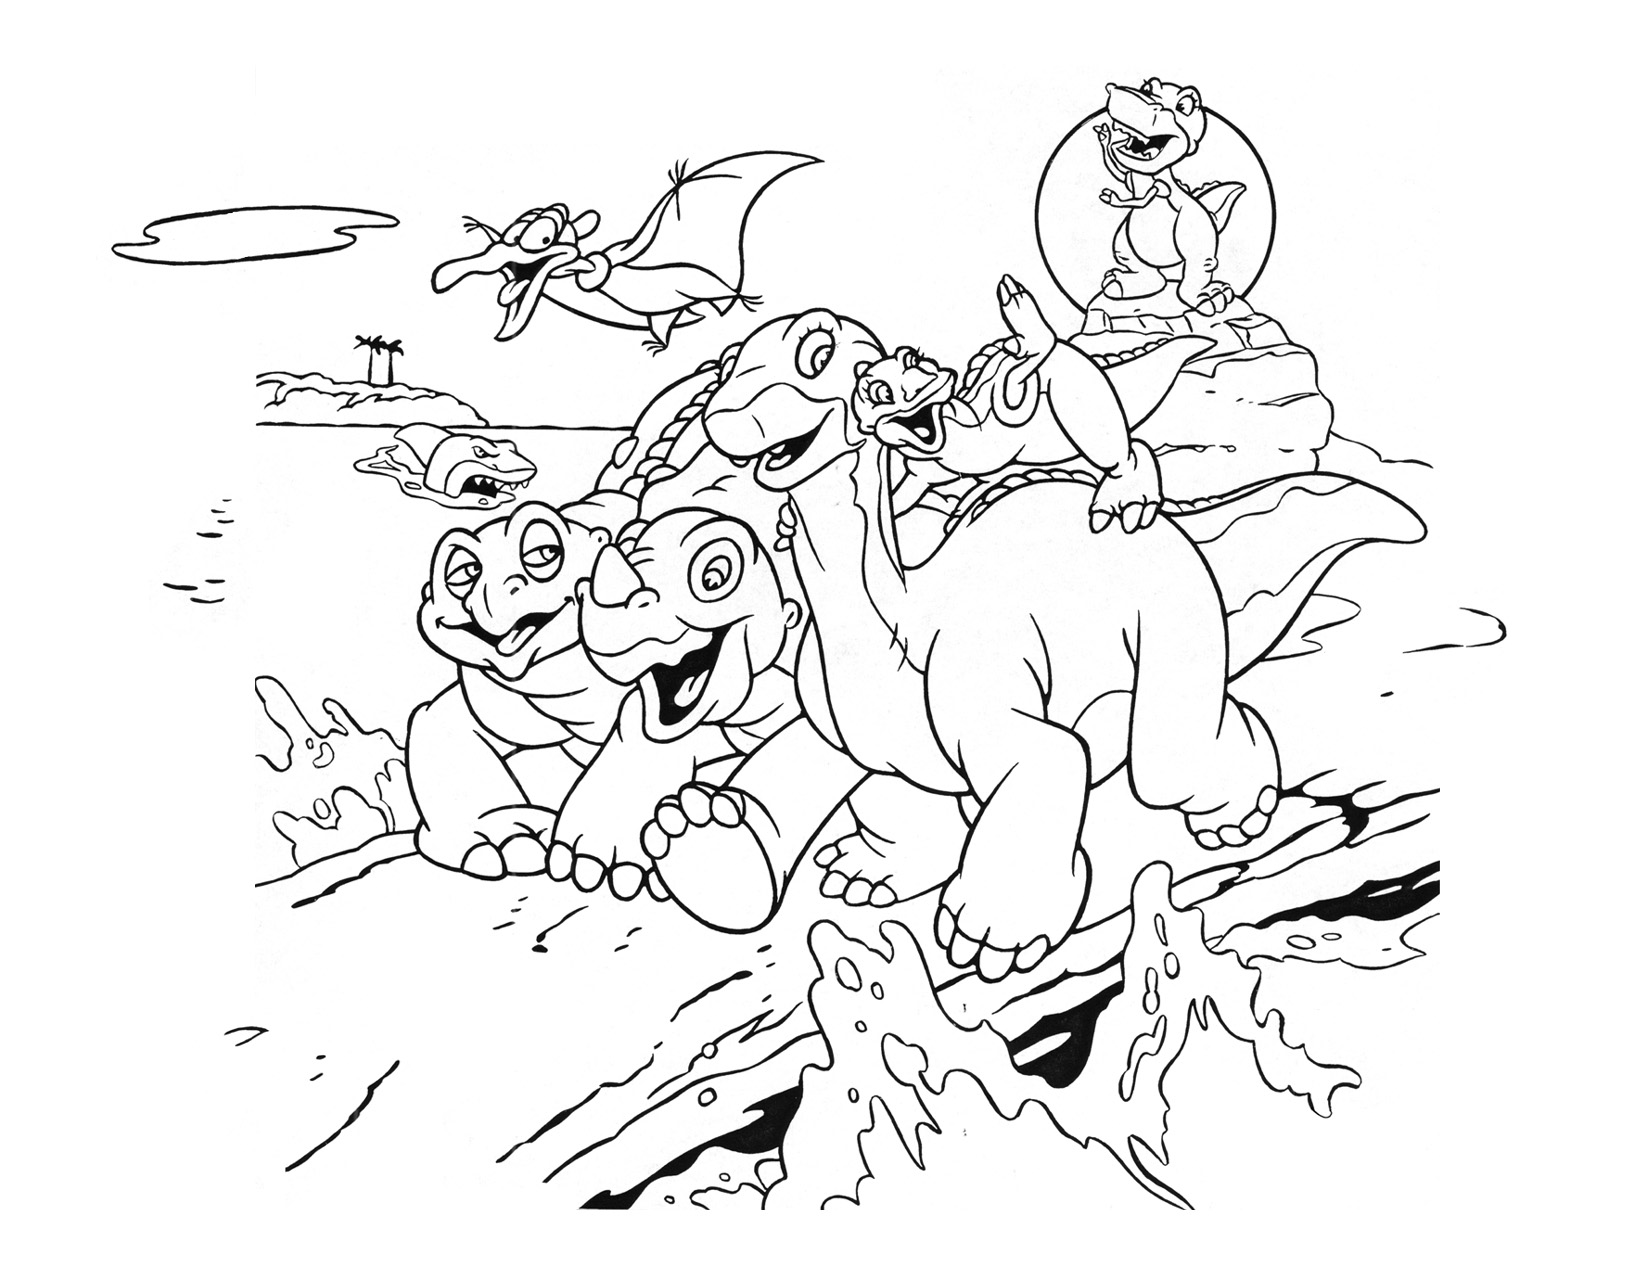 Landforeime Coloring Pages Getdrawings Freehe Series Journey Brave  Dinosaurs Netflix Full Movie Fanfiction Ducky Little Foot Dinosaur Secret  Saurus Rockop Blue Chip Colorings Info Land Before – Stephenbenedictdyson